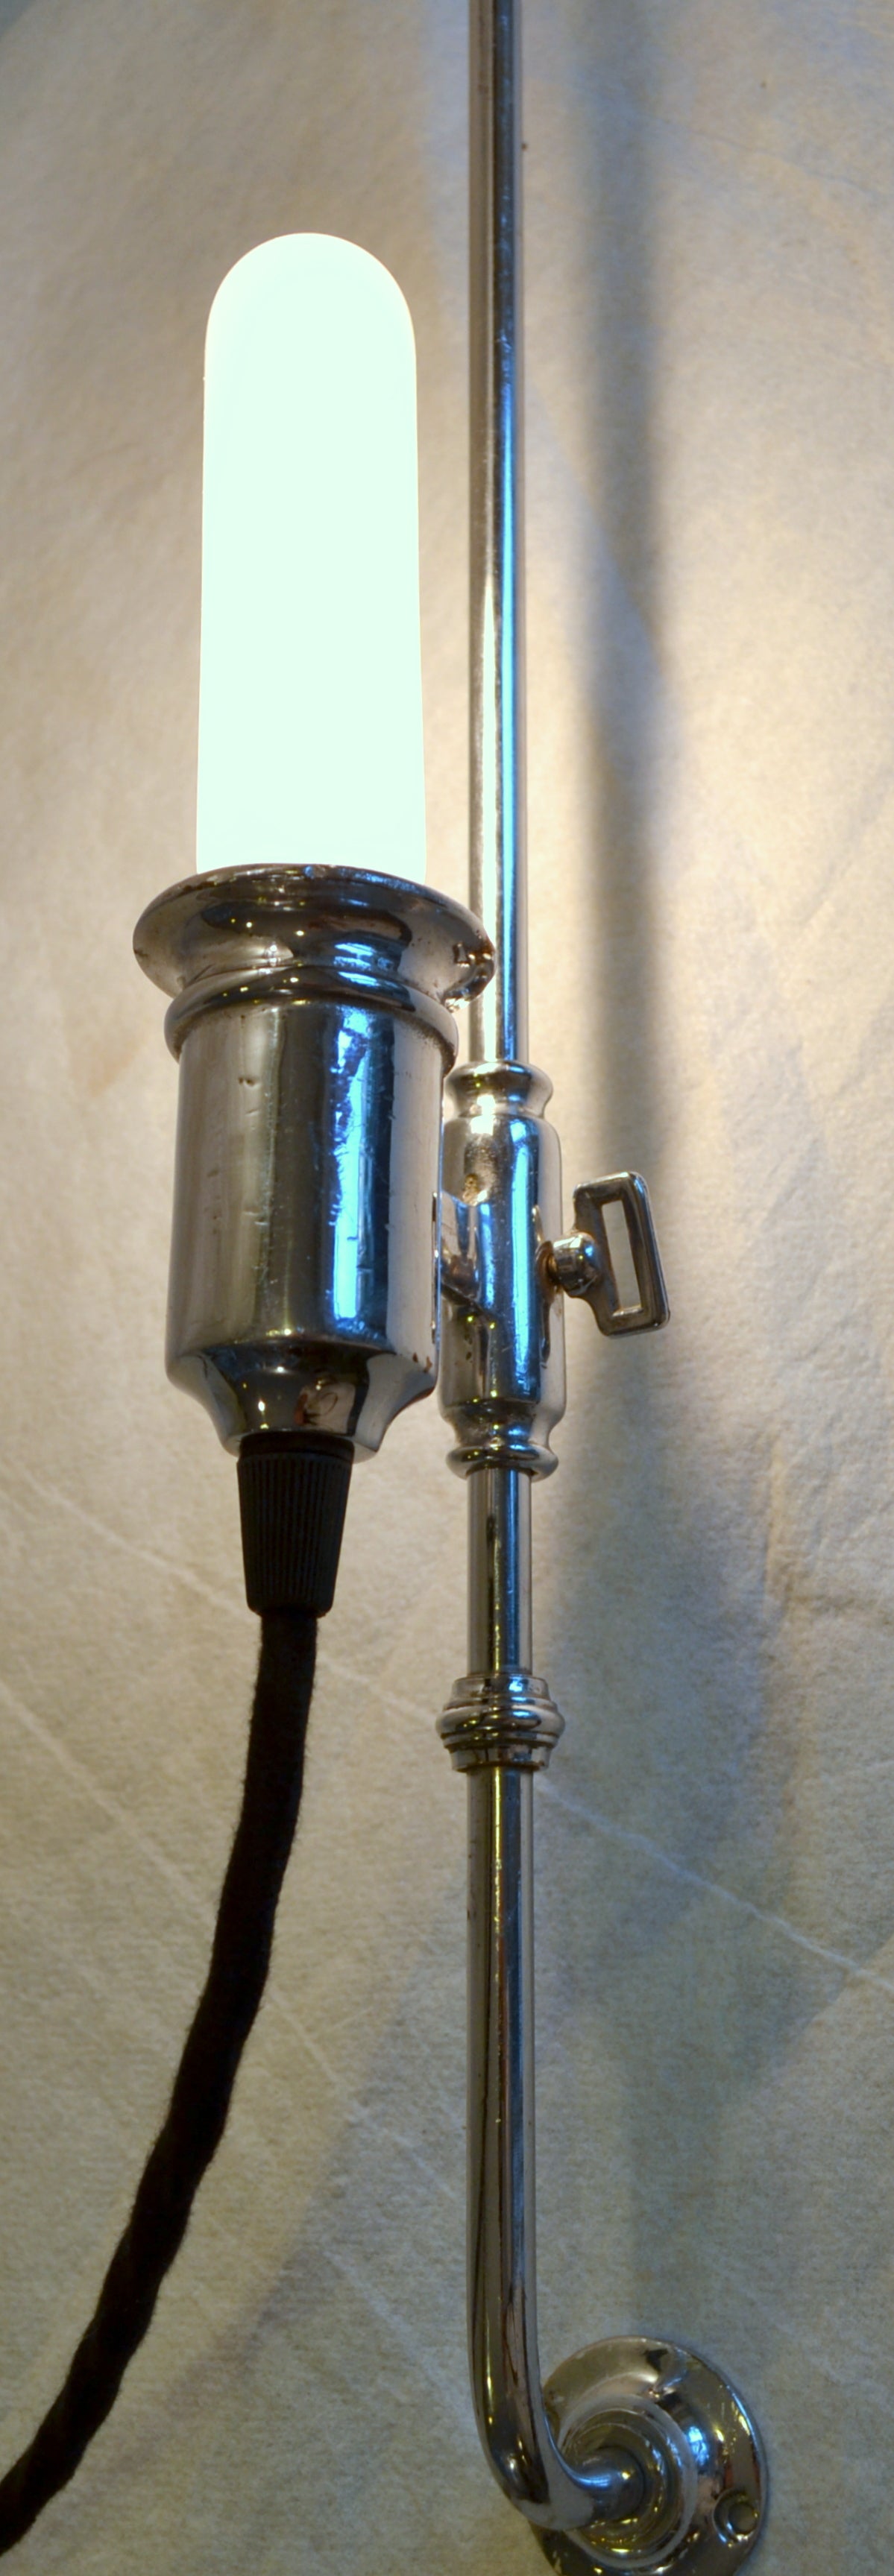 Arizona Biltmore Chrome-Plated Adjustable Sconces from 1929 Rare In Good Condition For Sale In Camden, ME